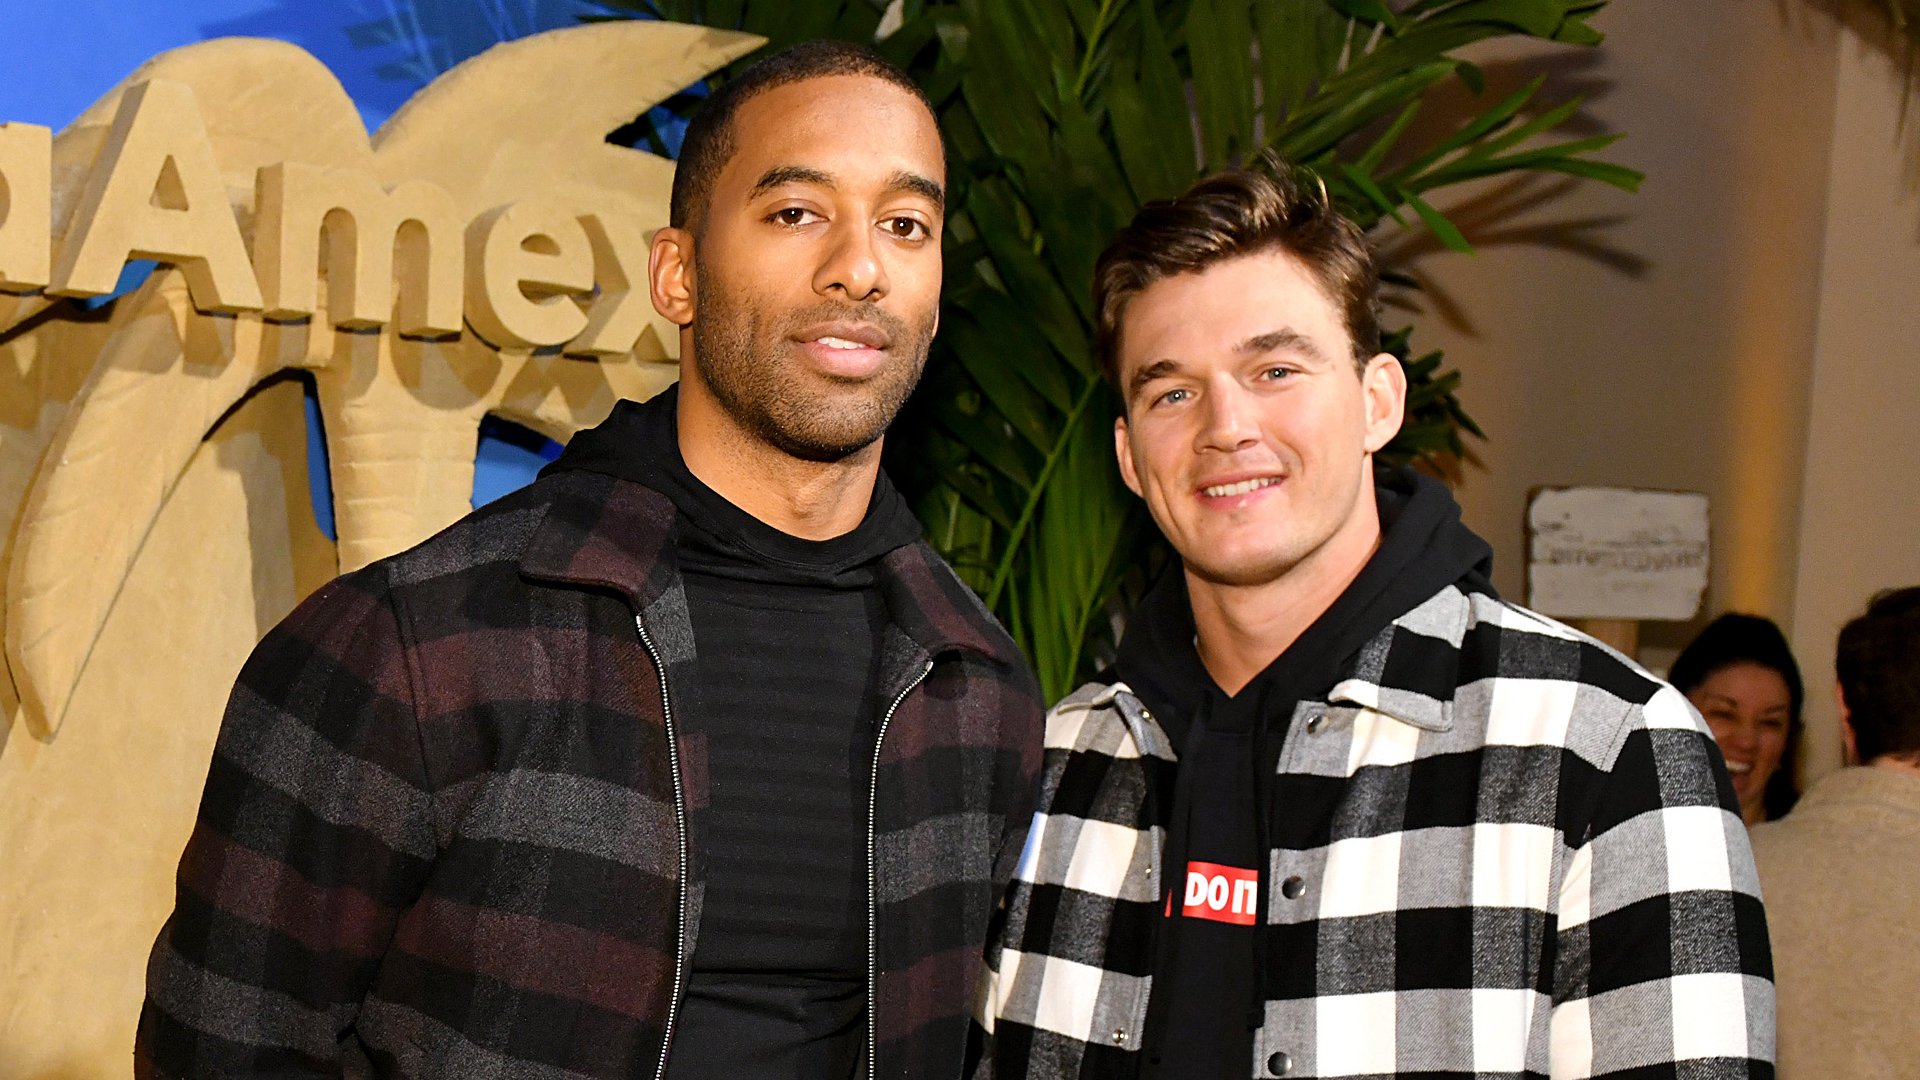 Bachelor Nation stars Matt James and Tyler Cameron attends the relaunch of The Delta SkyMiles® American Express Cards at Helen Mills Event Space on February 06, 2020 in New York City. 